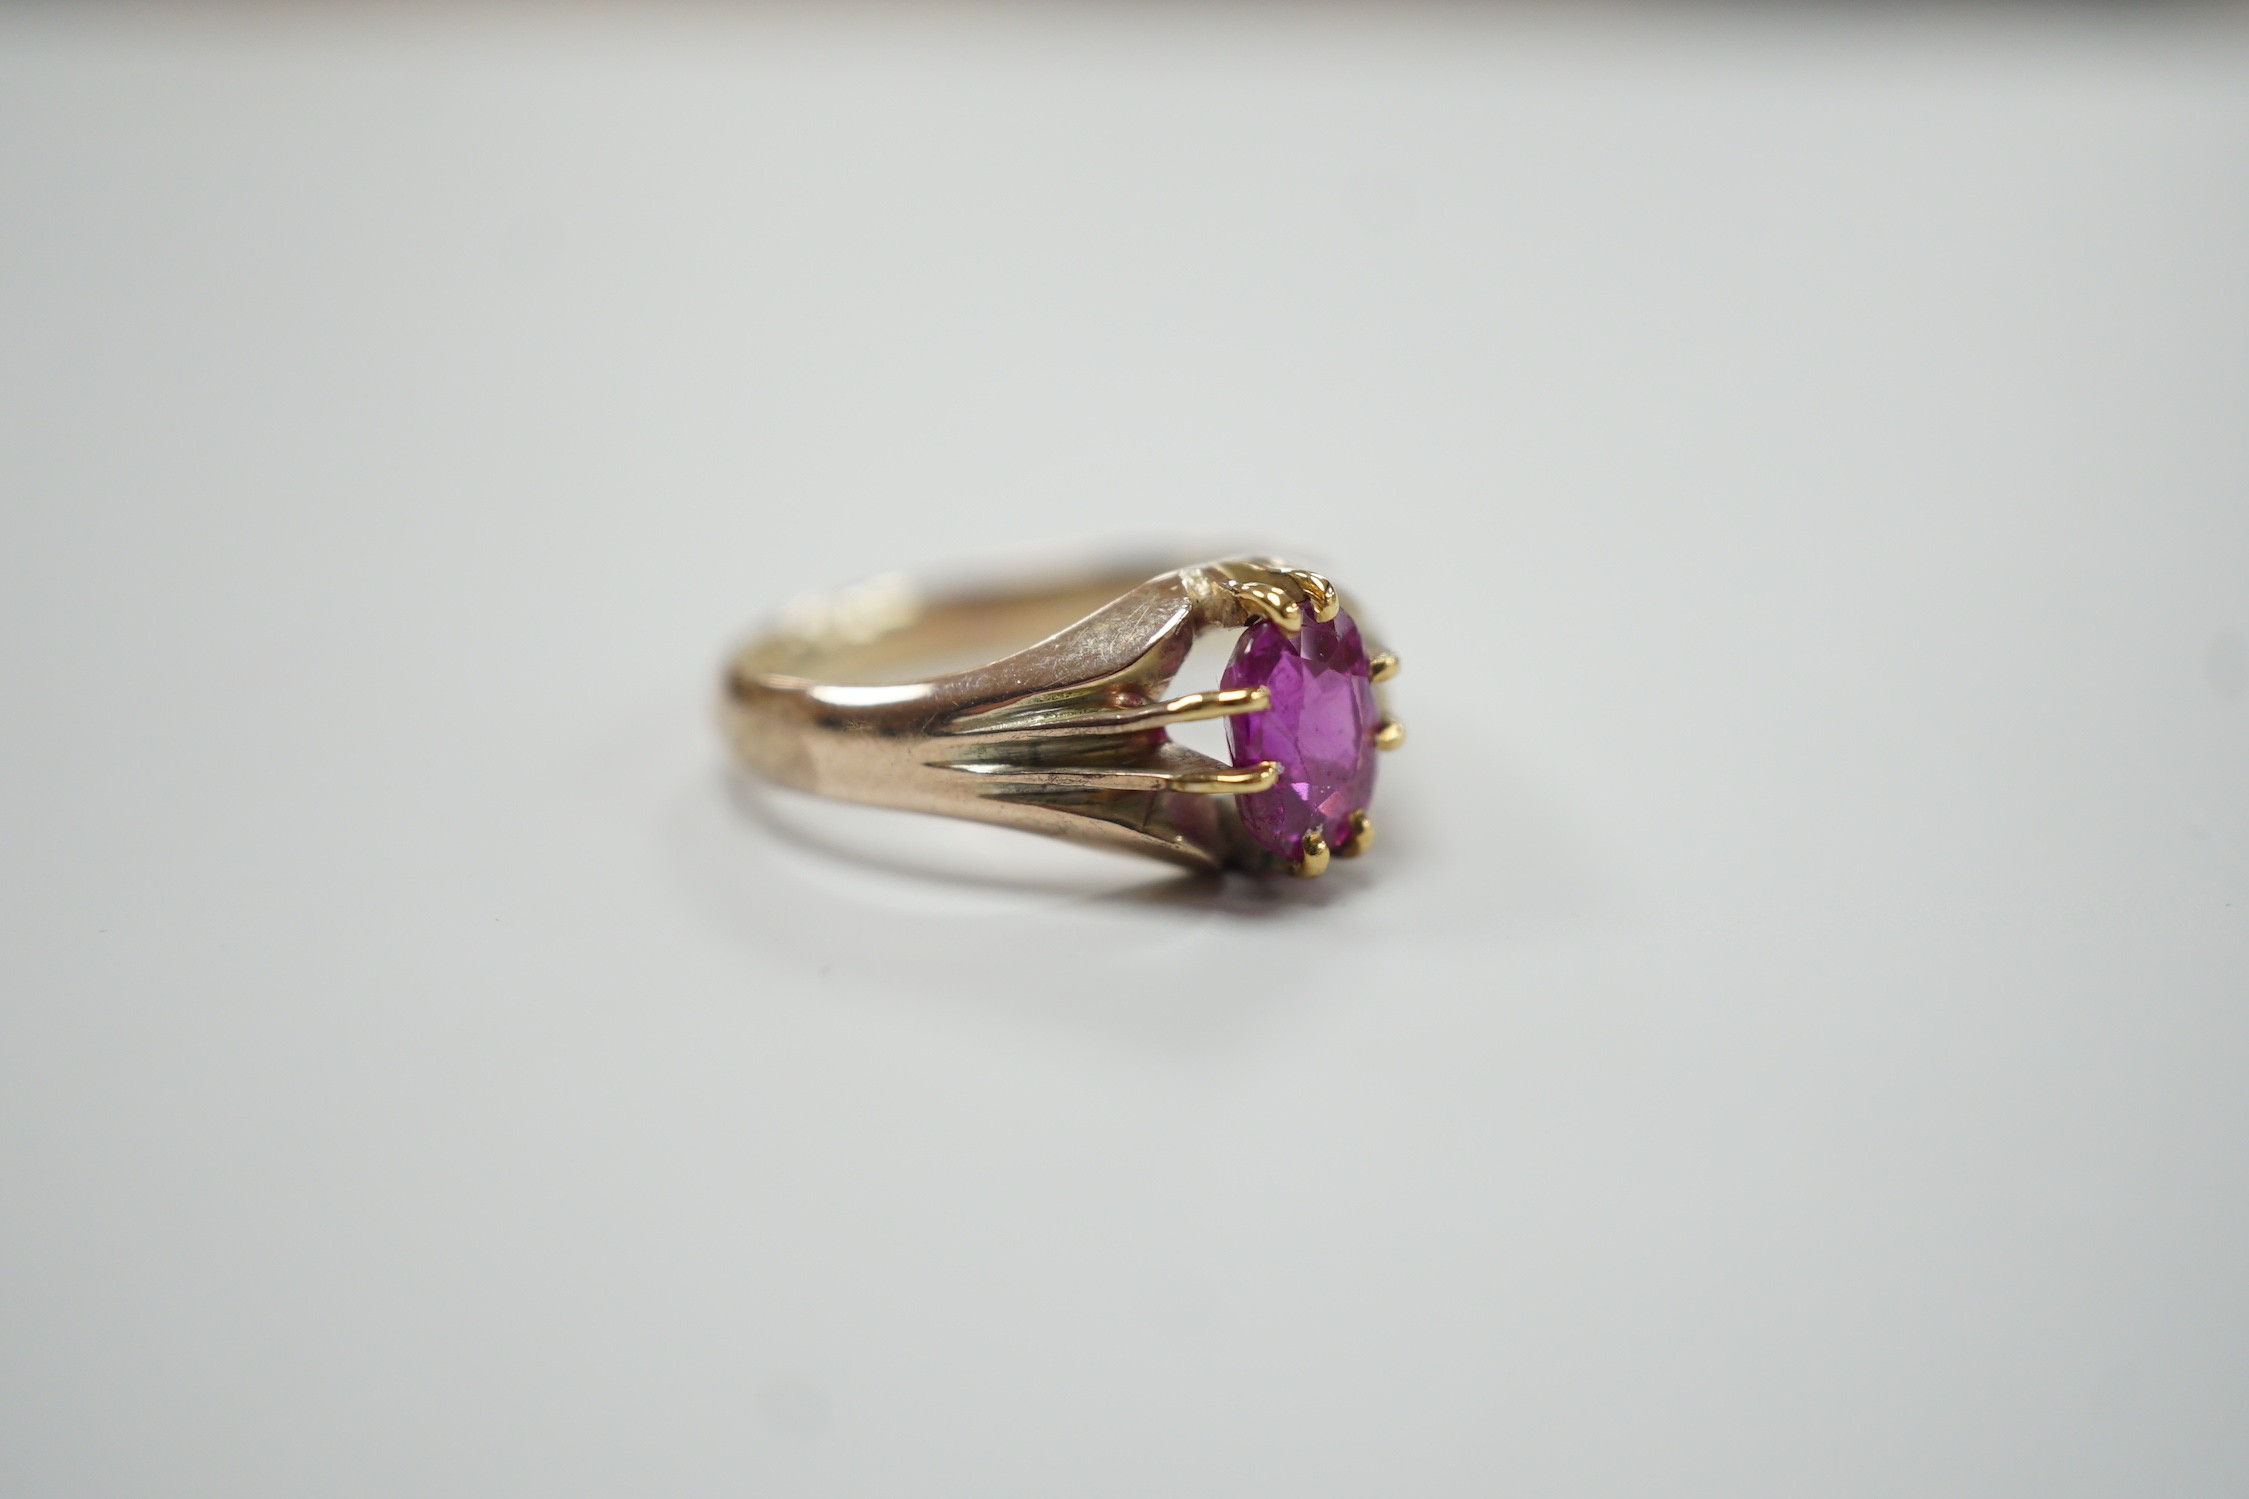 A yellow metal and claw set solitaire oval cut ruby/pink sapphire? ring, size L, gross weight 3.3 grams